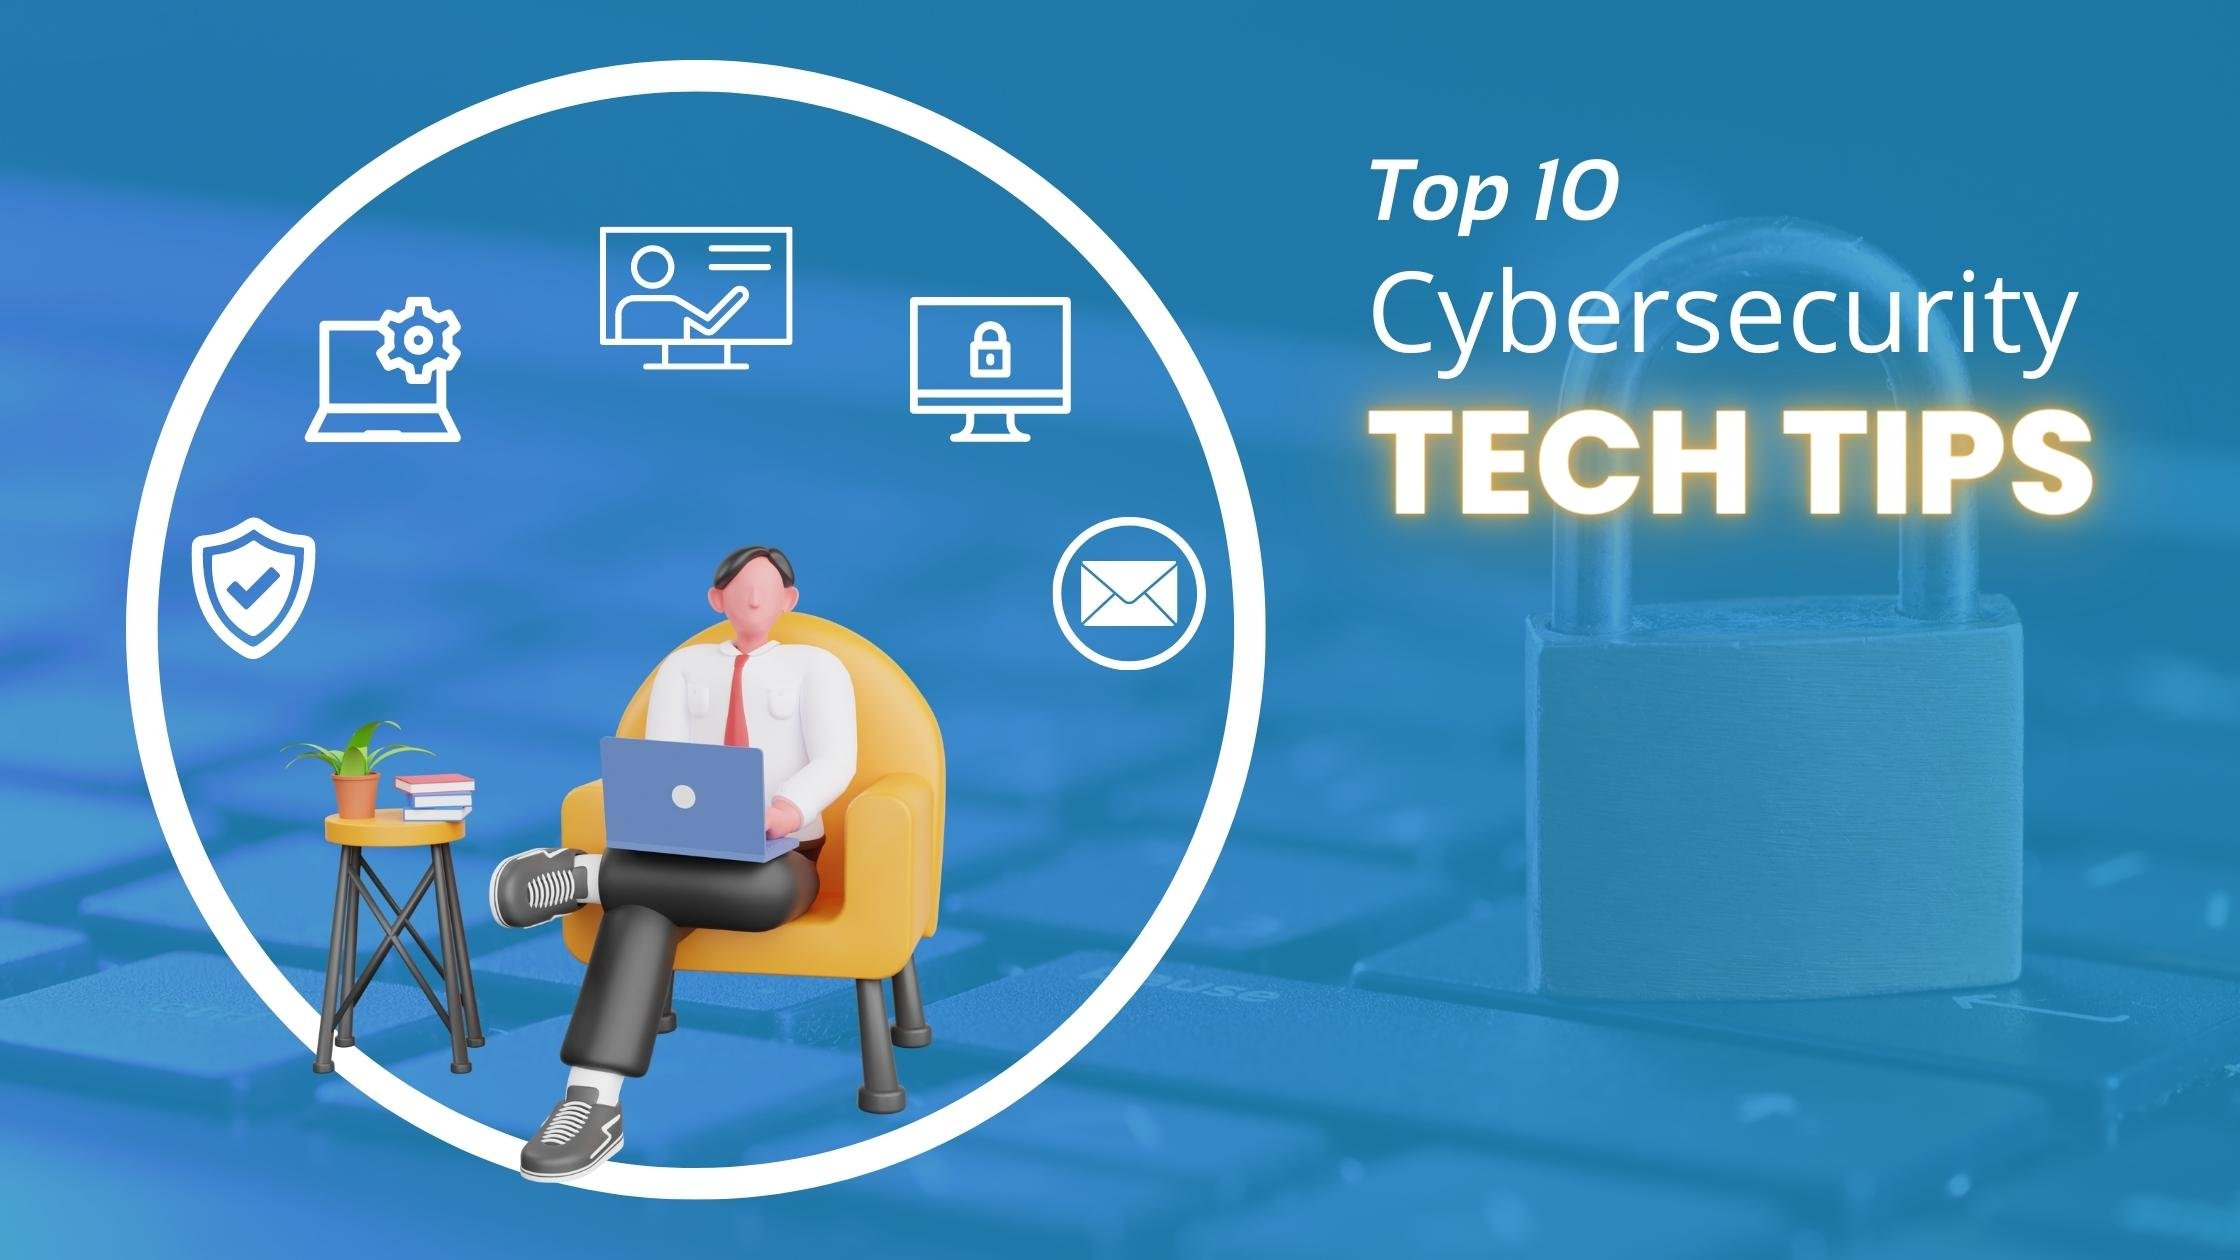 Top 10 Cybersecurity Tech Tips for Small Businesses in 2022